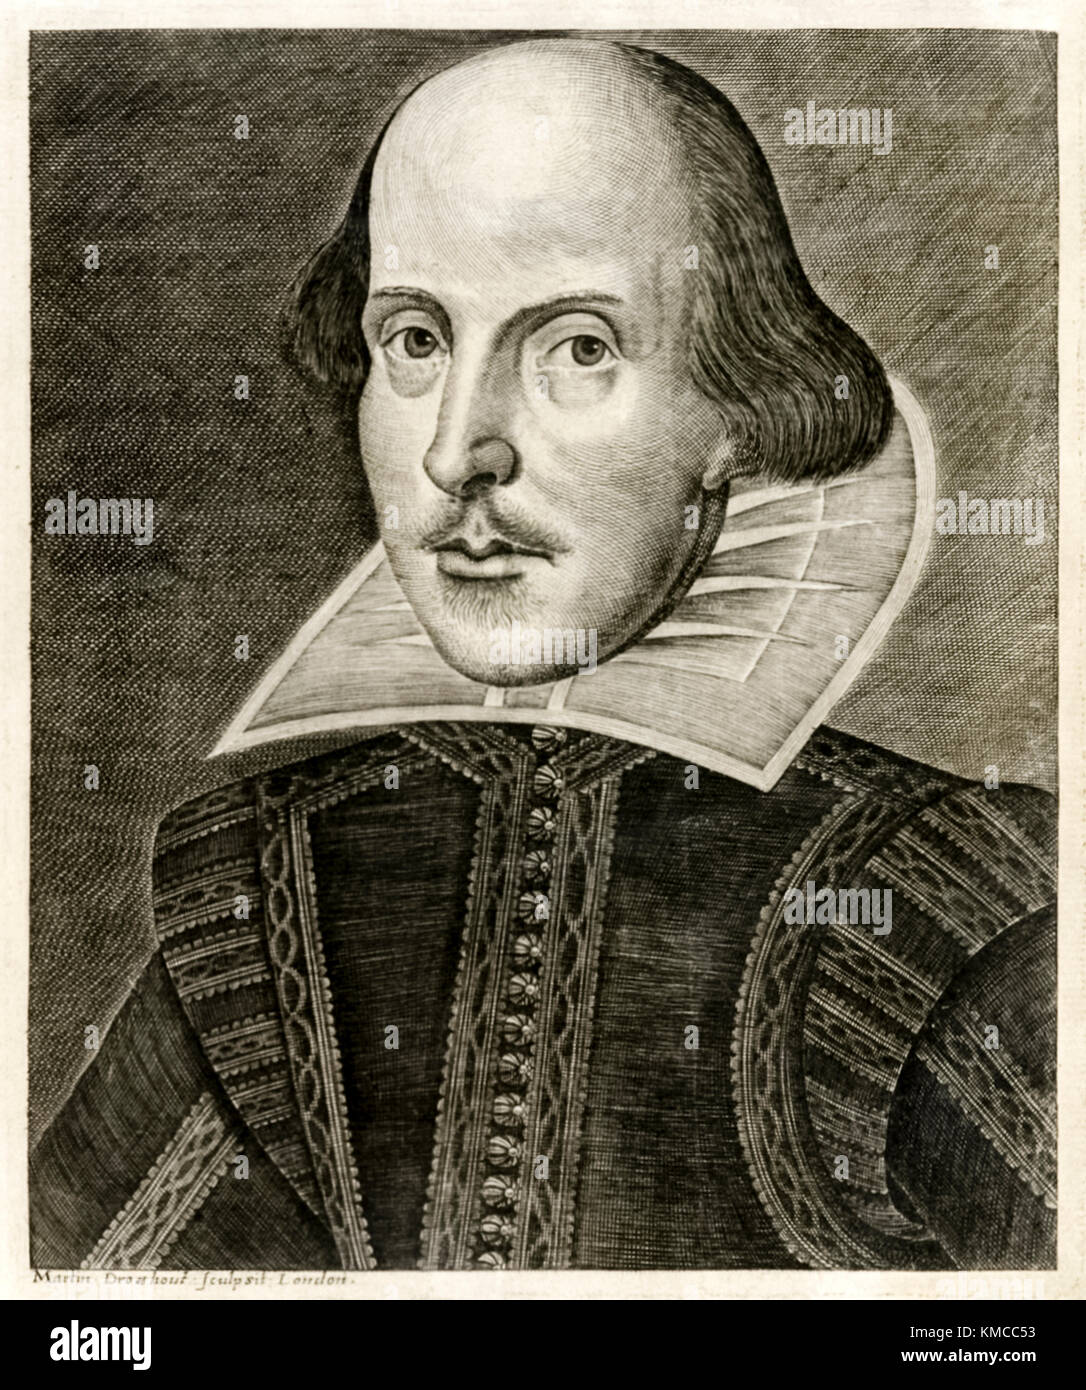 William Shakespeare (1564-1616) from the title page of ‘Mr William Shakespeare’s comedies, histories, & tragedies’ published in 1623 better known as ‘The First Folio’; engraving by Martin Droeshout (1601-1650). Stock Photo